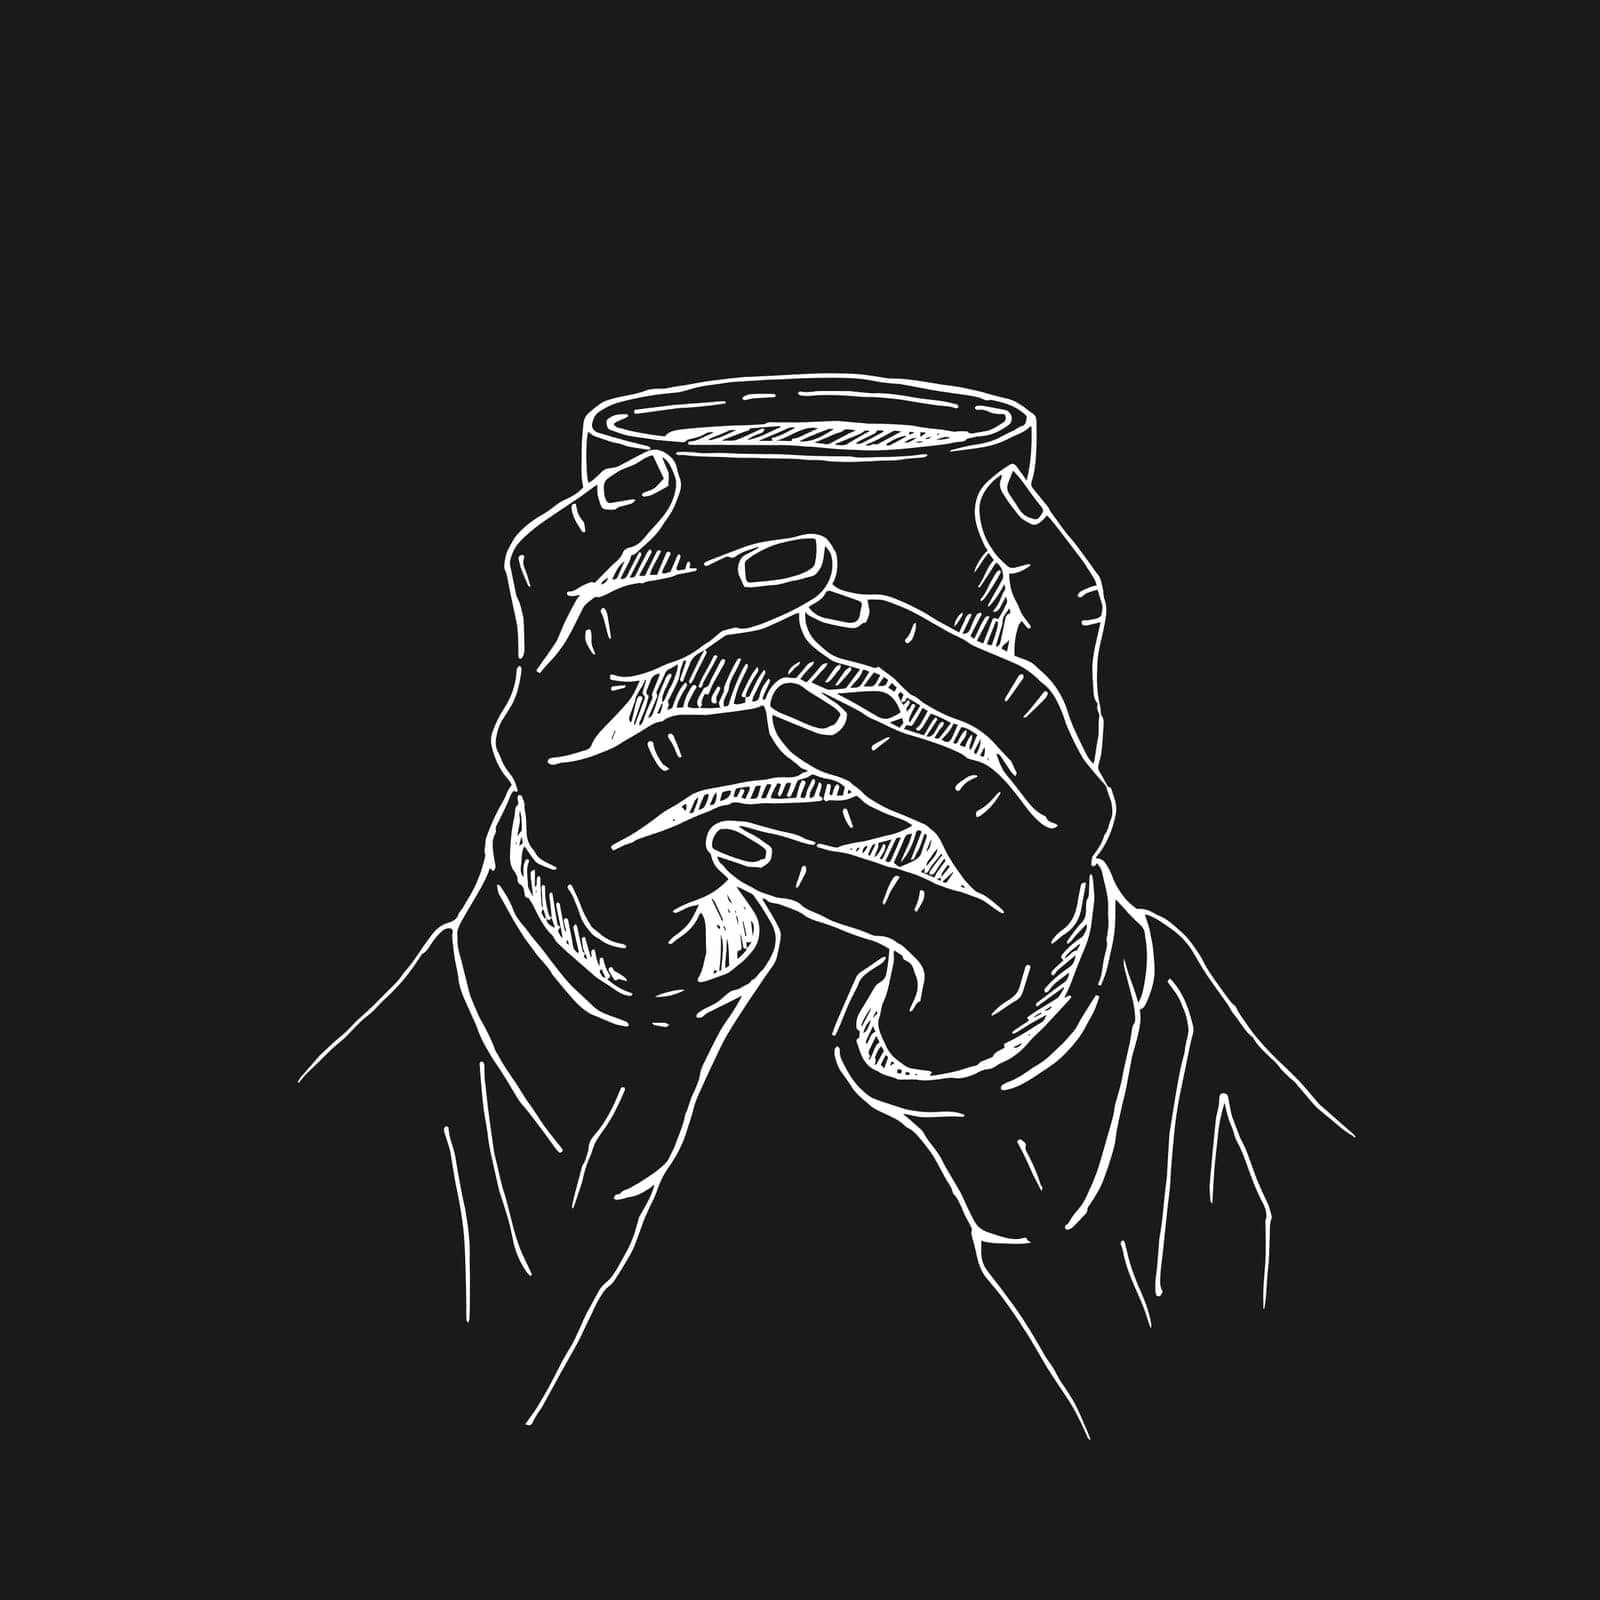 Hand drawn sketch of hands holding a cup of coffee, tea etc. Vector illustration isolated on black background. 